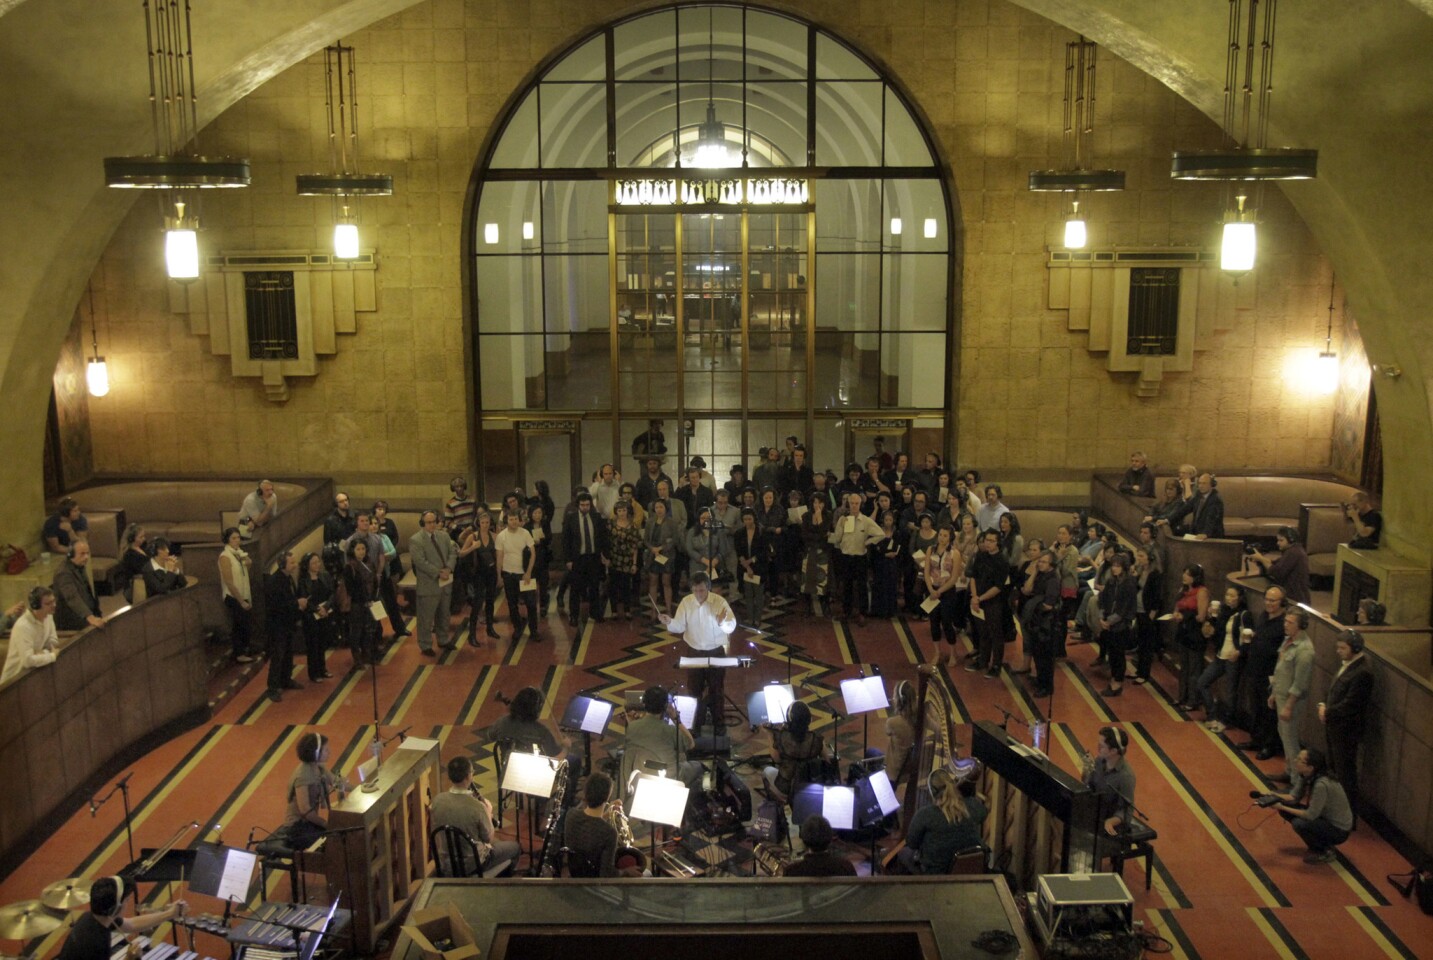 The orchestra conducts a dress rehearsal of the opera "Invisible Cities" in Union Station in Los Angeles on Oct. 17, 2013. The performance of The Industry company's new opera, based on Italo Calvino's novel with music by composer Christopher Cerrone, uses remote audio devices that allow performers and audience members wearing headsets to mingle among the train passengers and experience the opera environmentally.